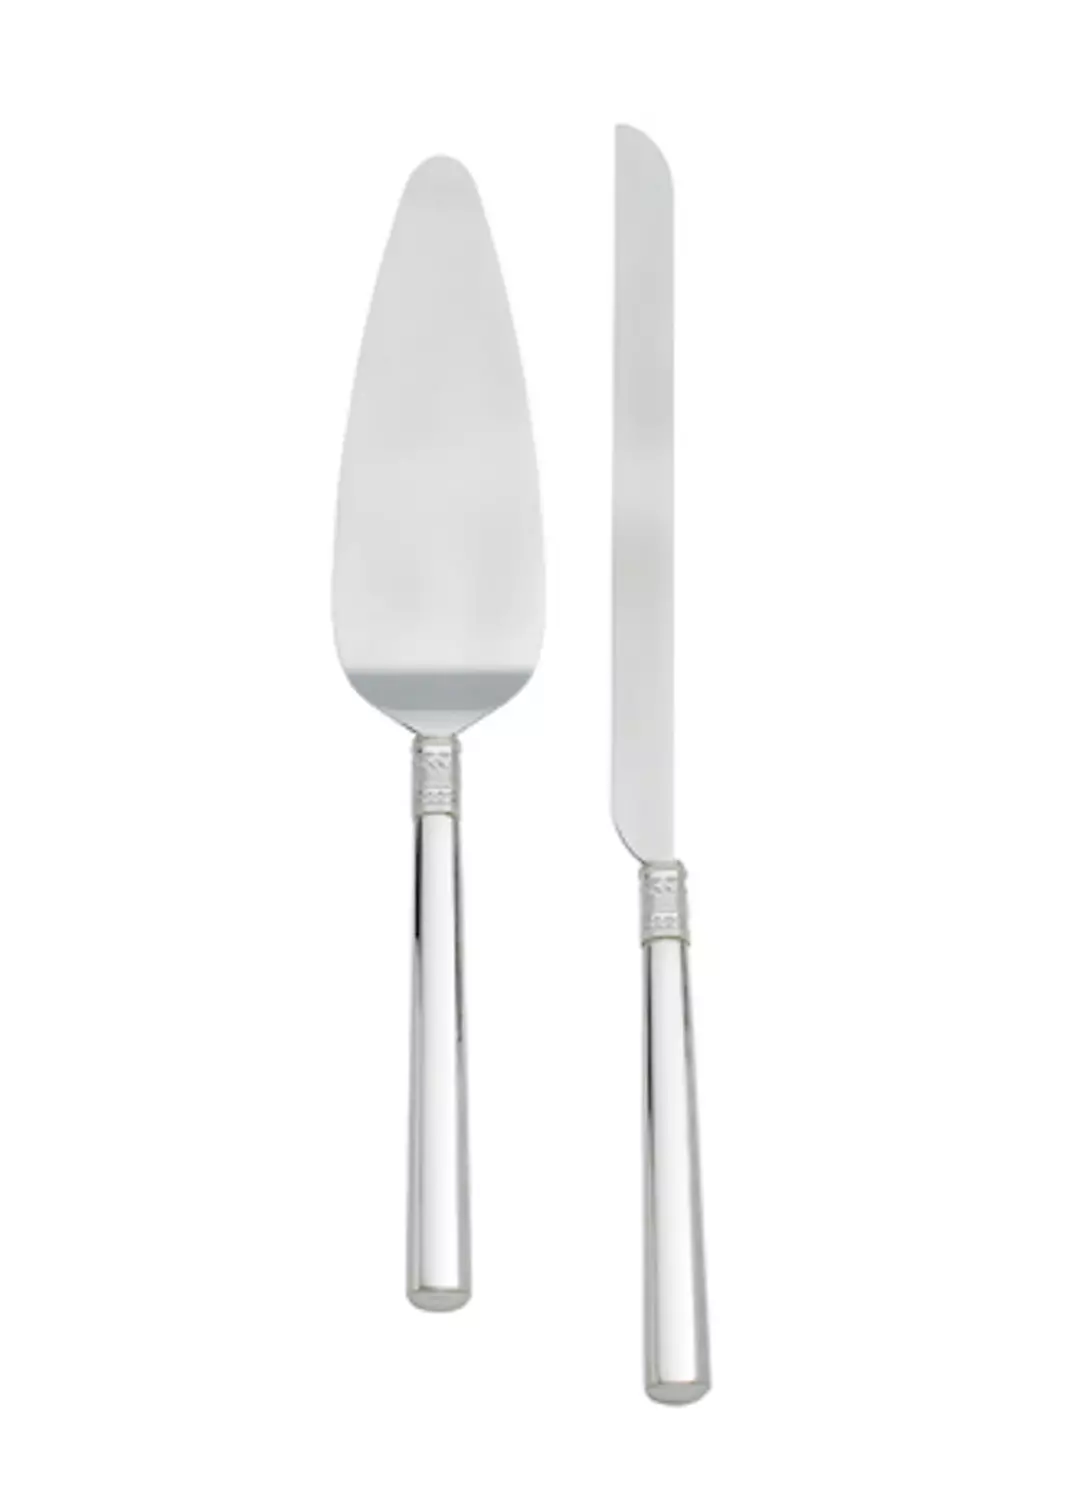 Vera Wang With Love Cake Knife and Server Image 1